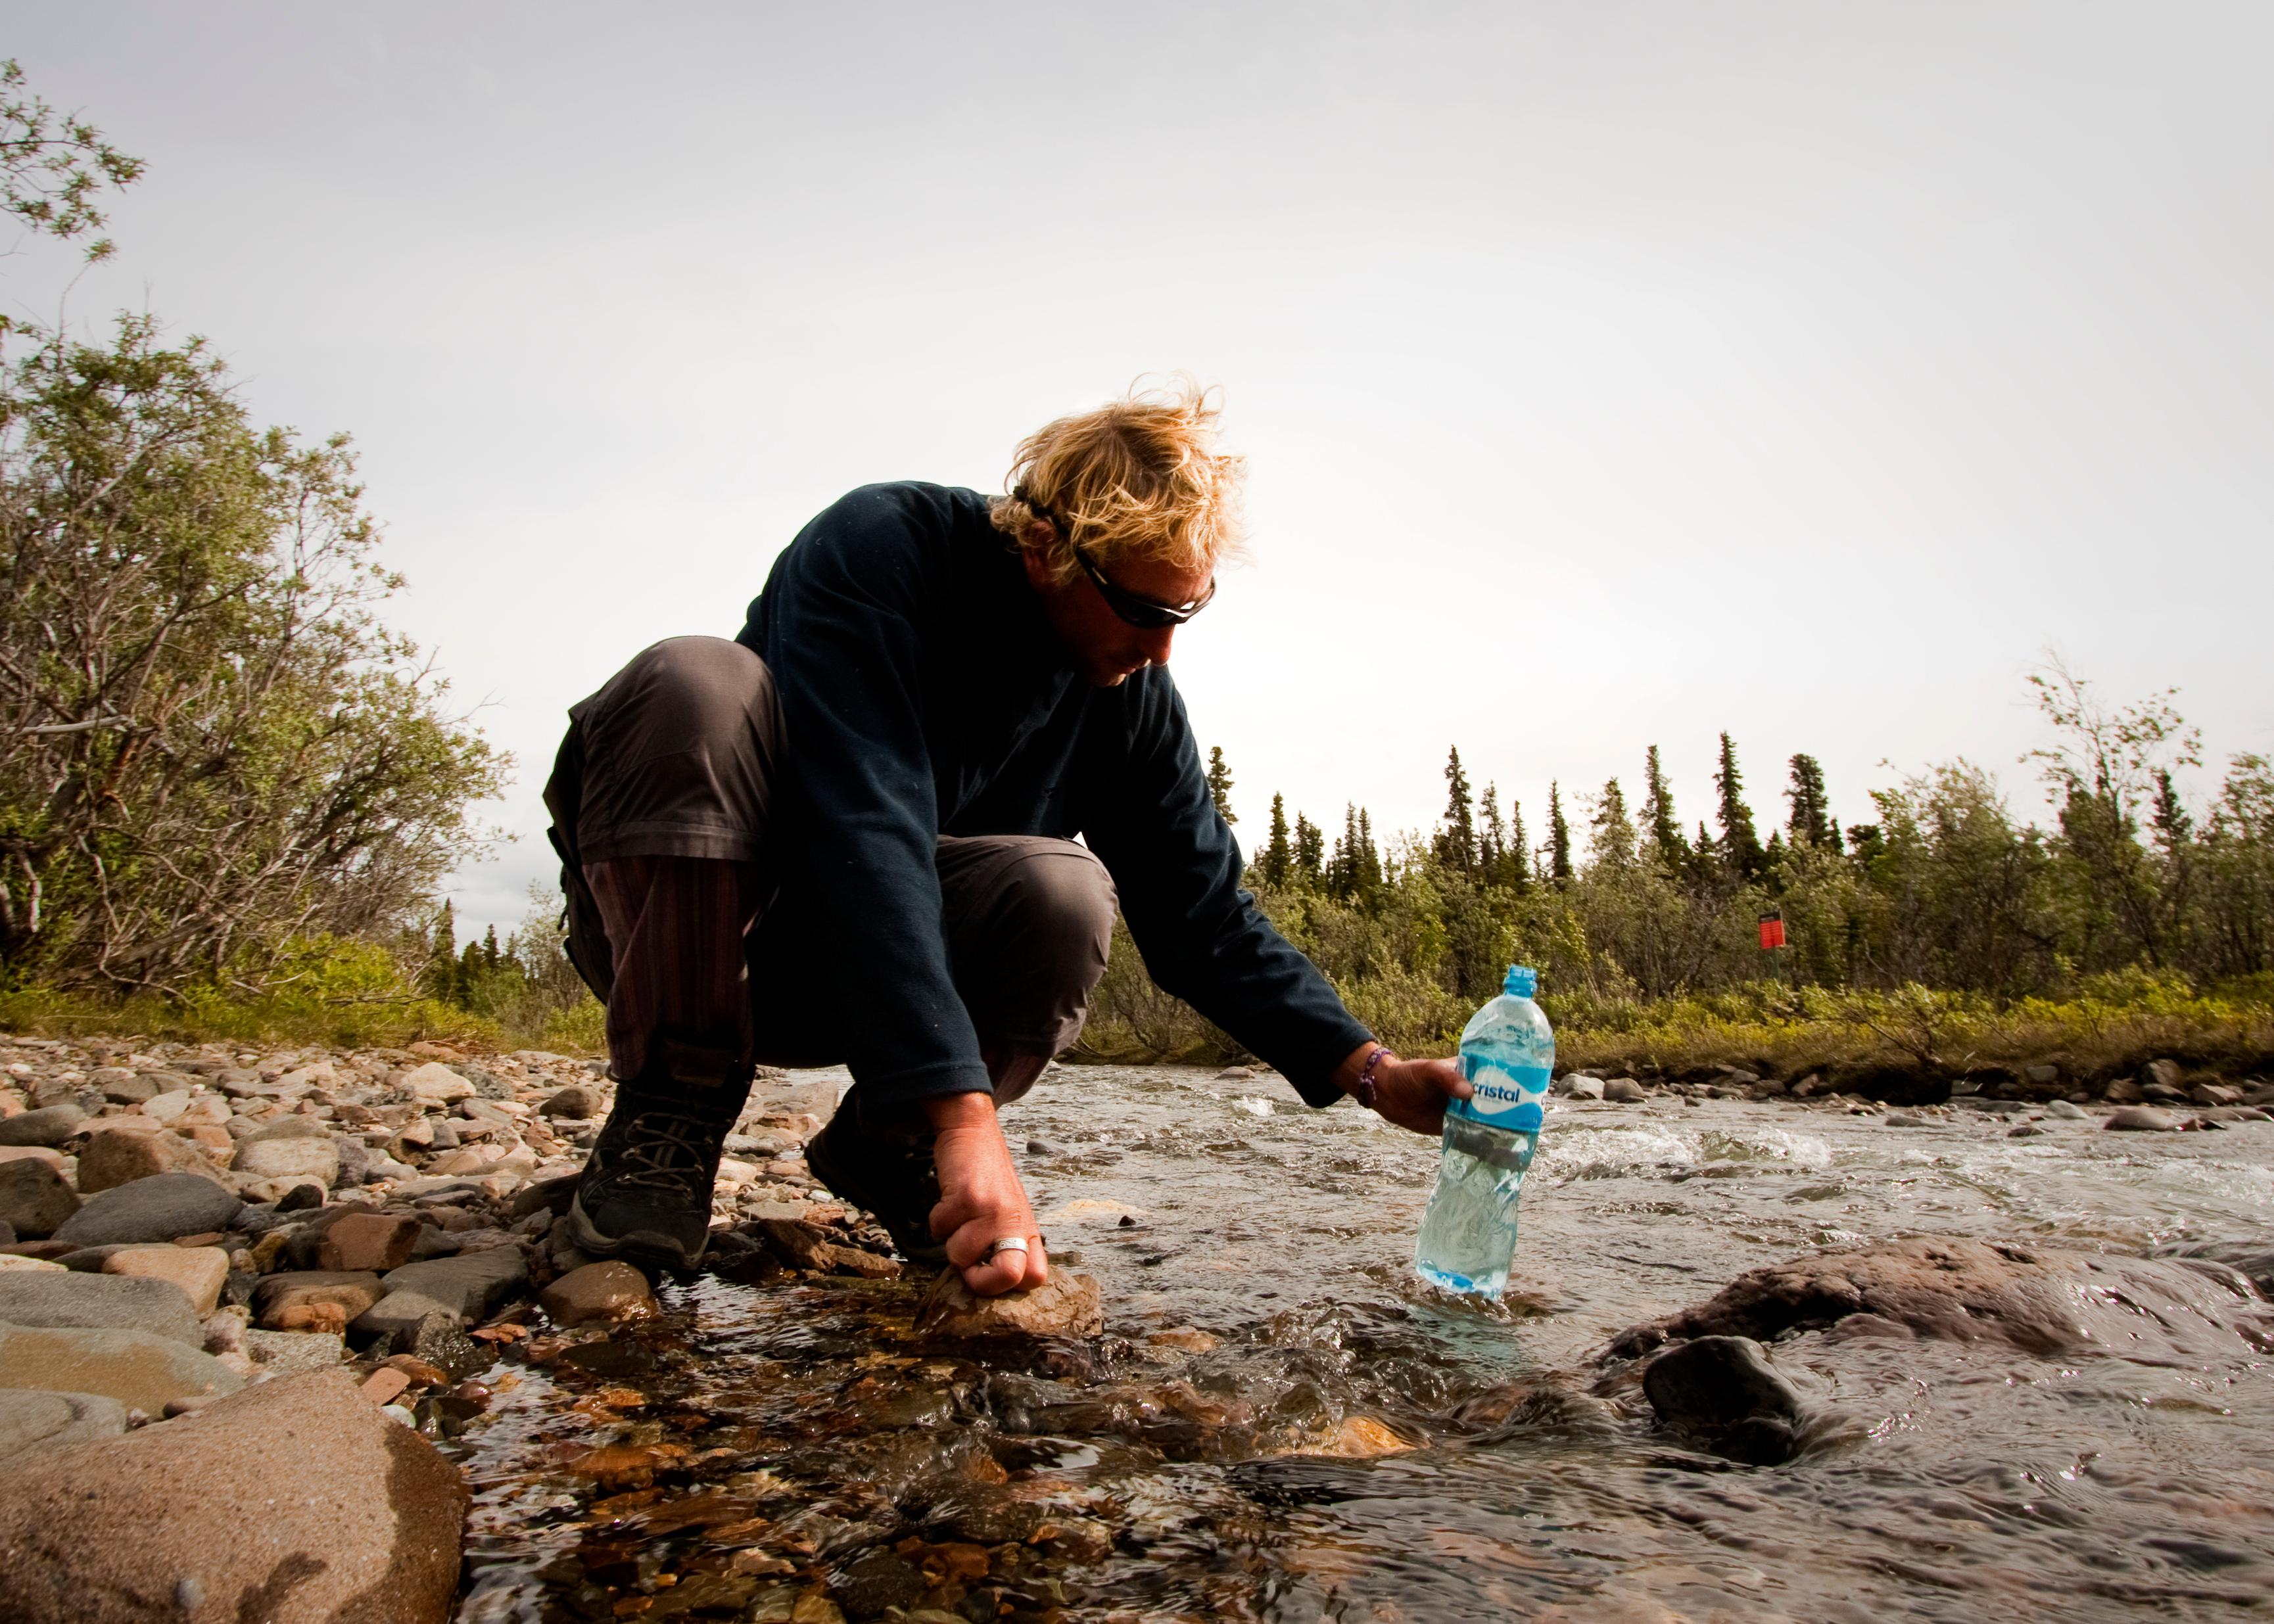 a woman filtering water into a plastic bottle from a shallow creek